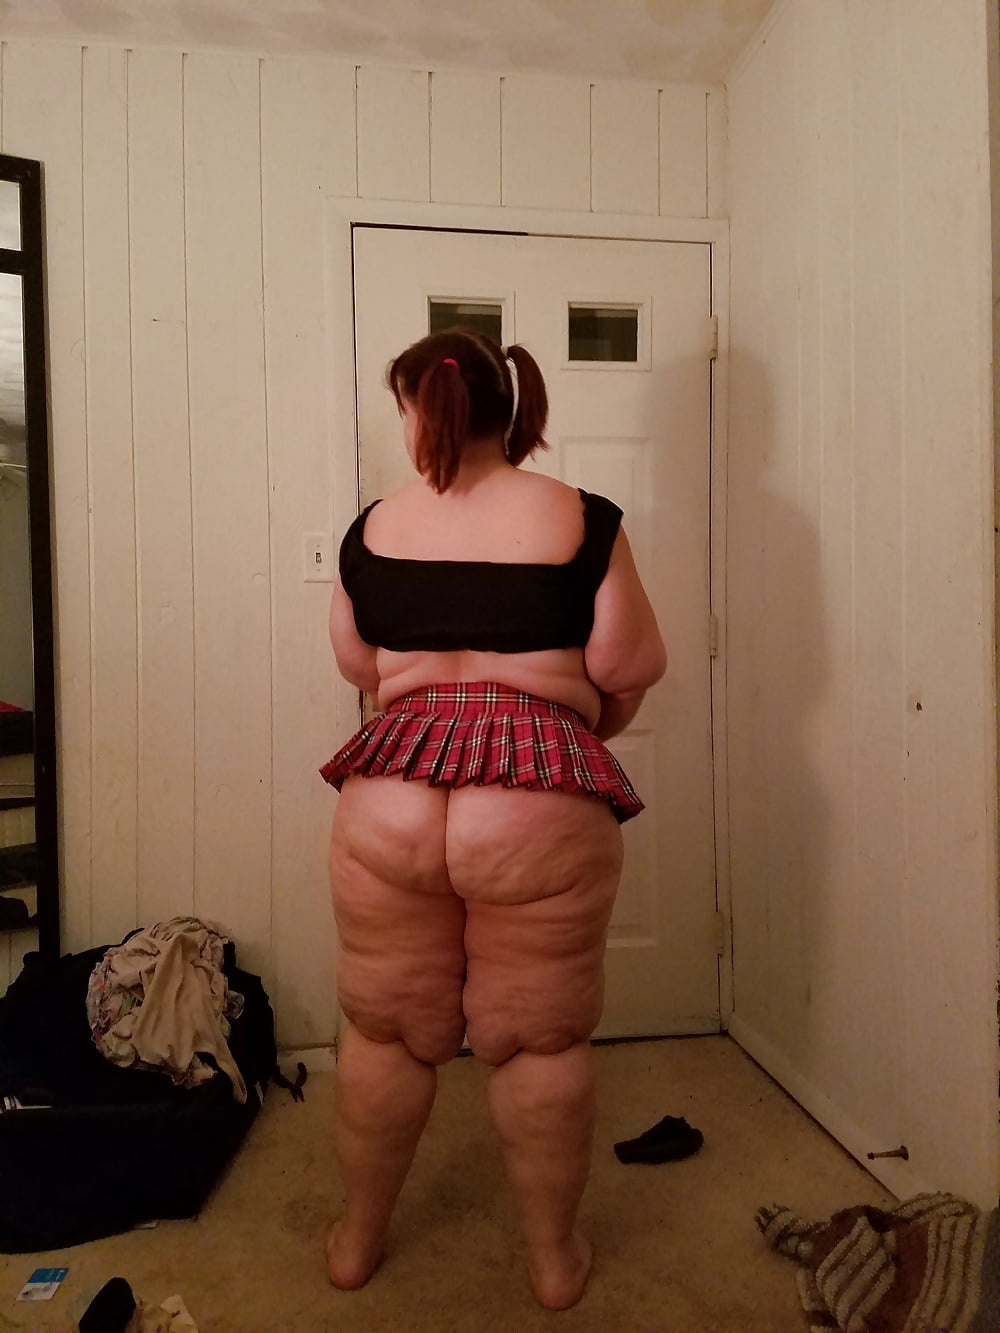 JUICY Fat Ass In A Short Skirt 13 Pic